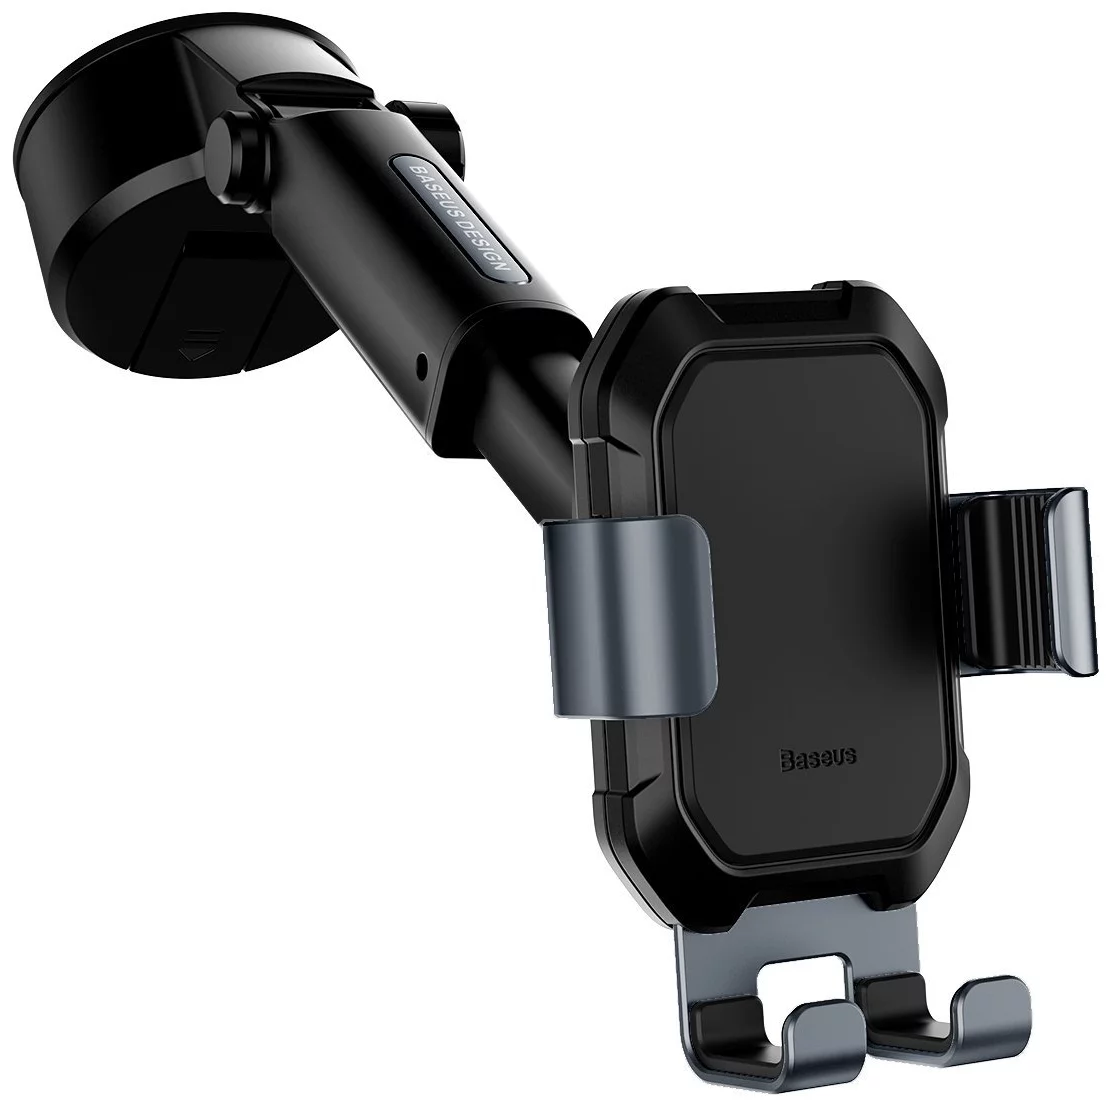 Holder Baseus Gravity car mount for Tank phone with suction cup (black)